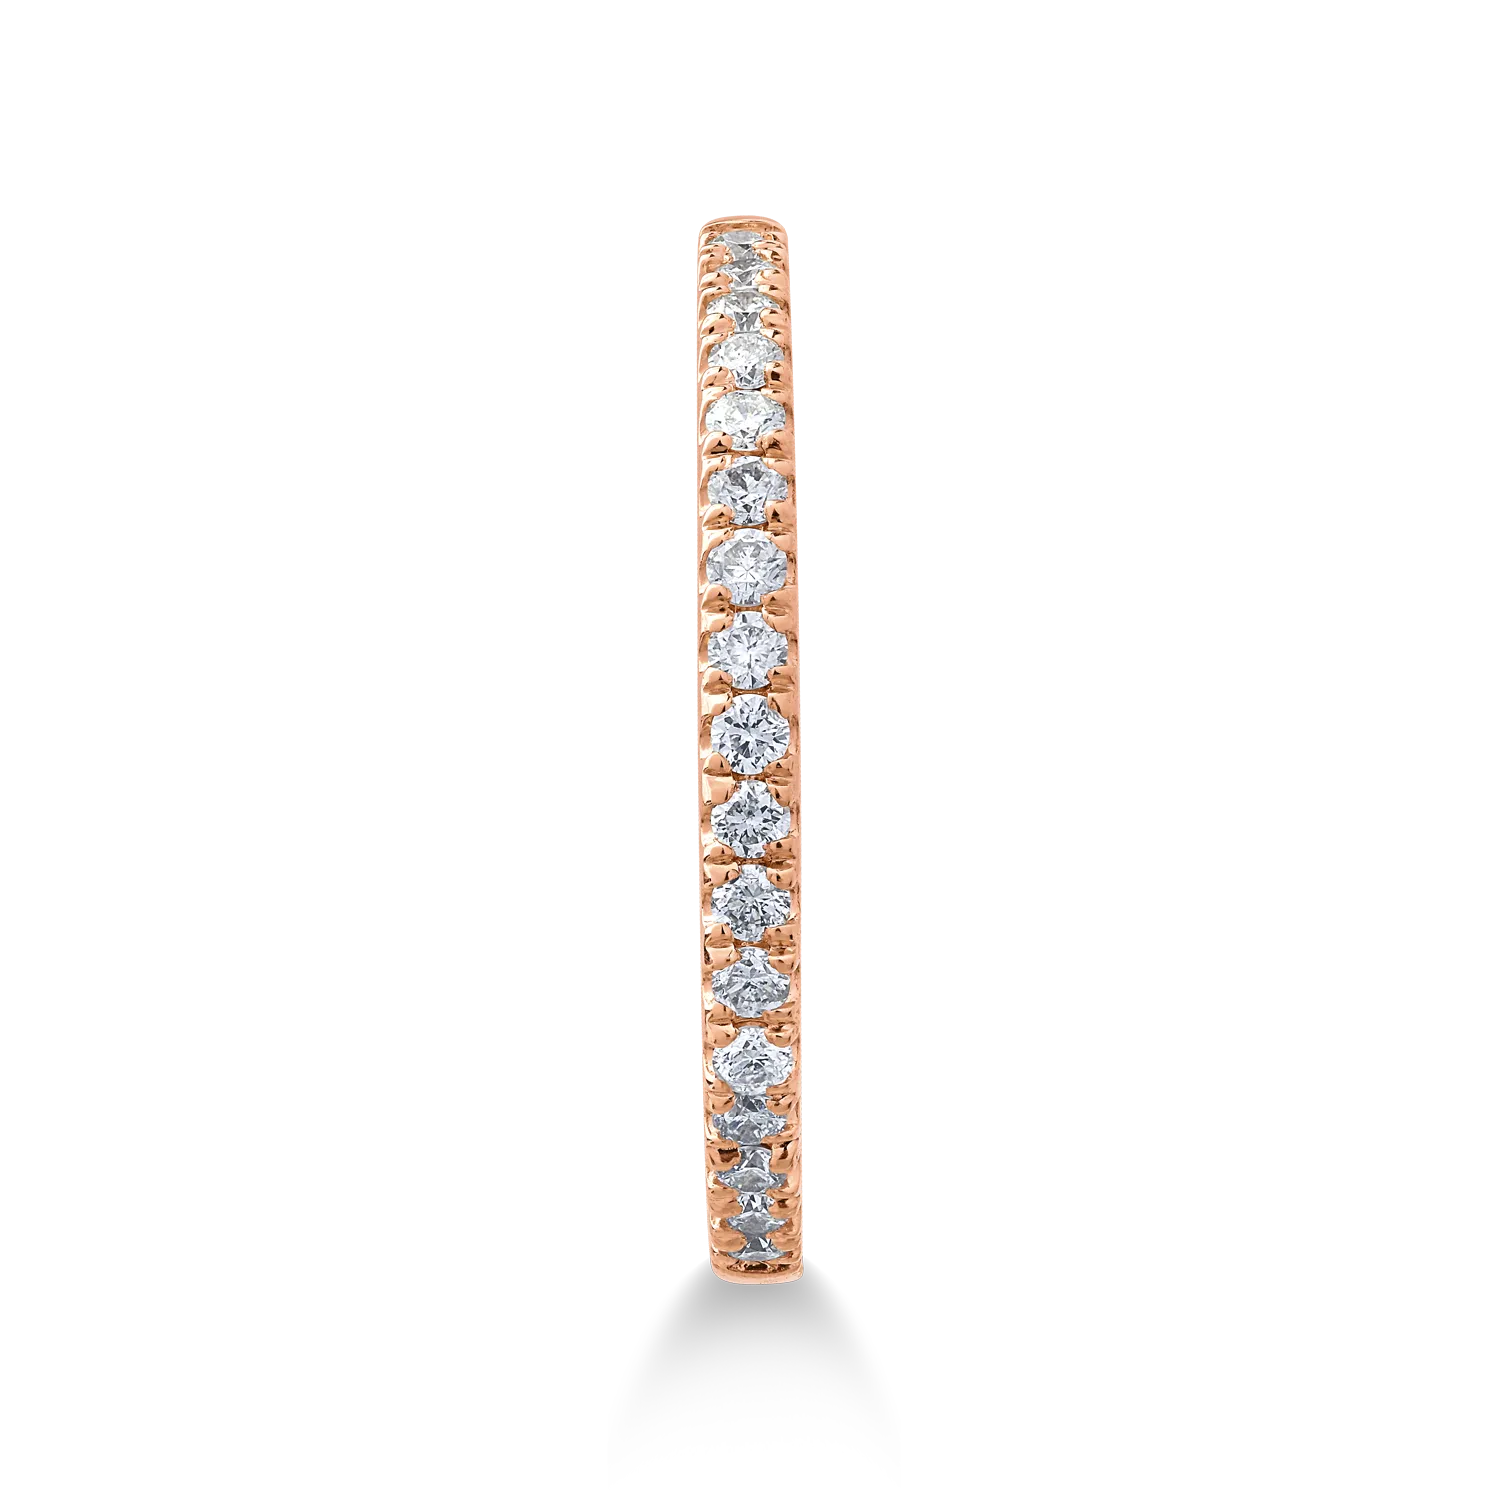 14K rose gold ring with 0.17ct diamonds